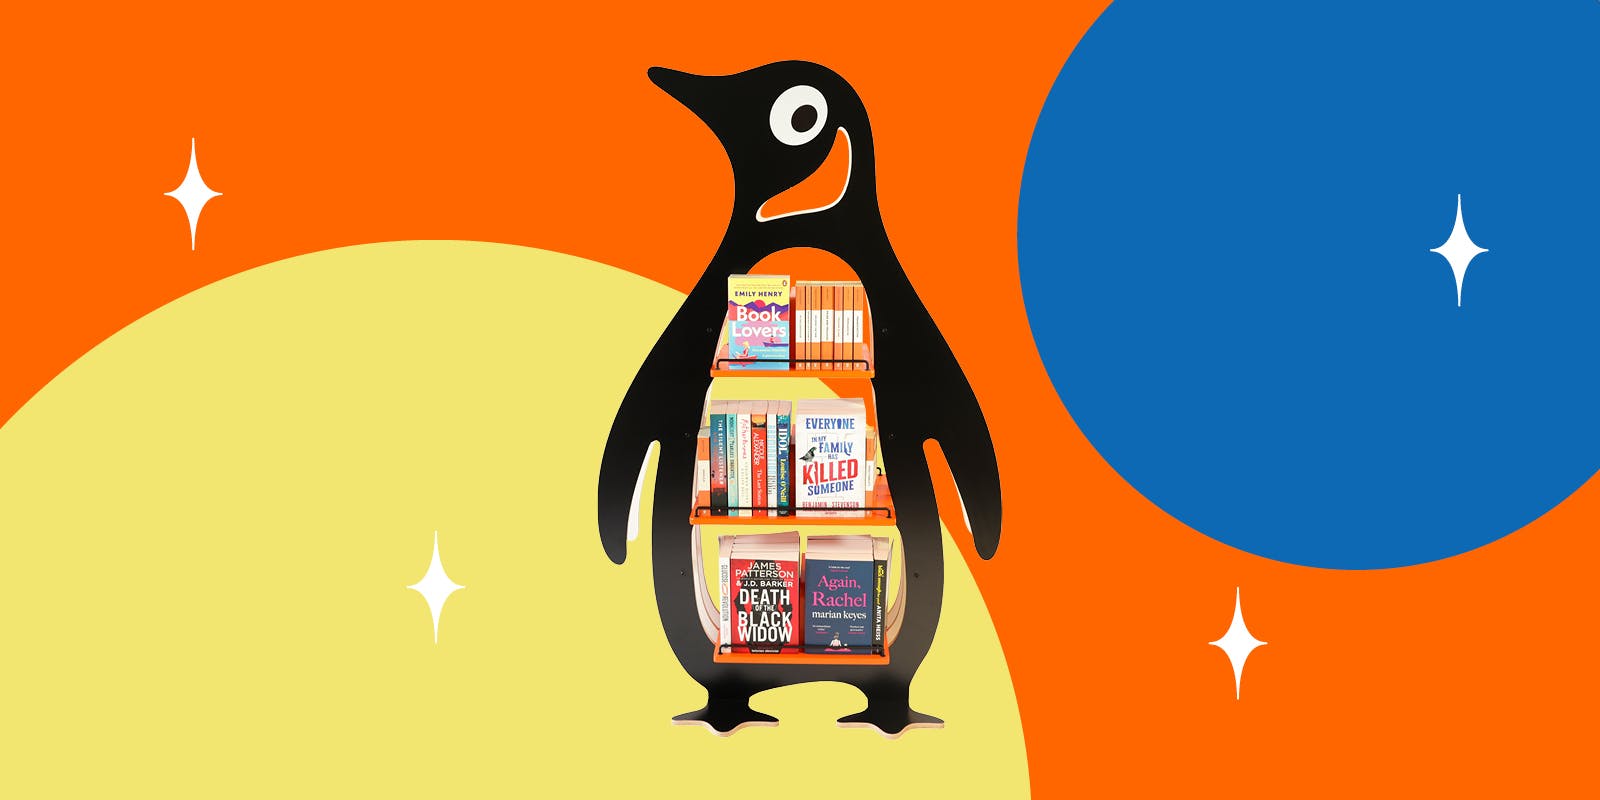 We’re giving away a one-of-a-kind Penguin bookcase